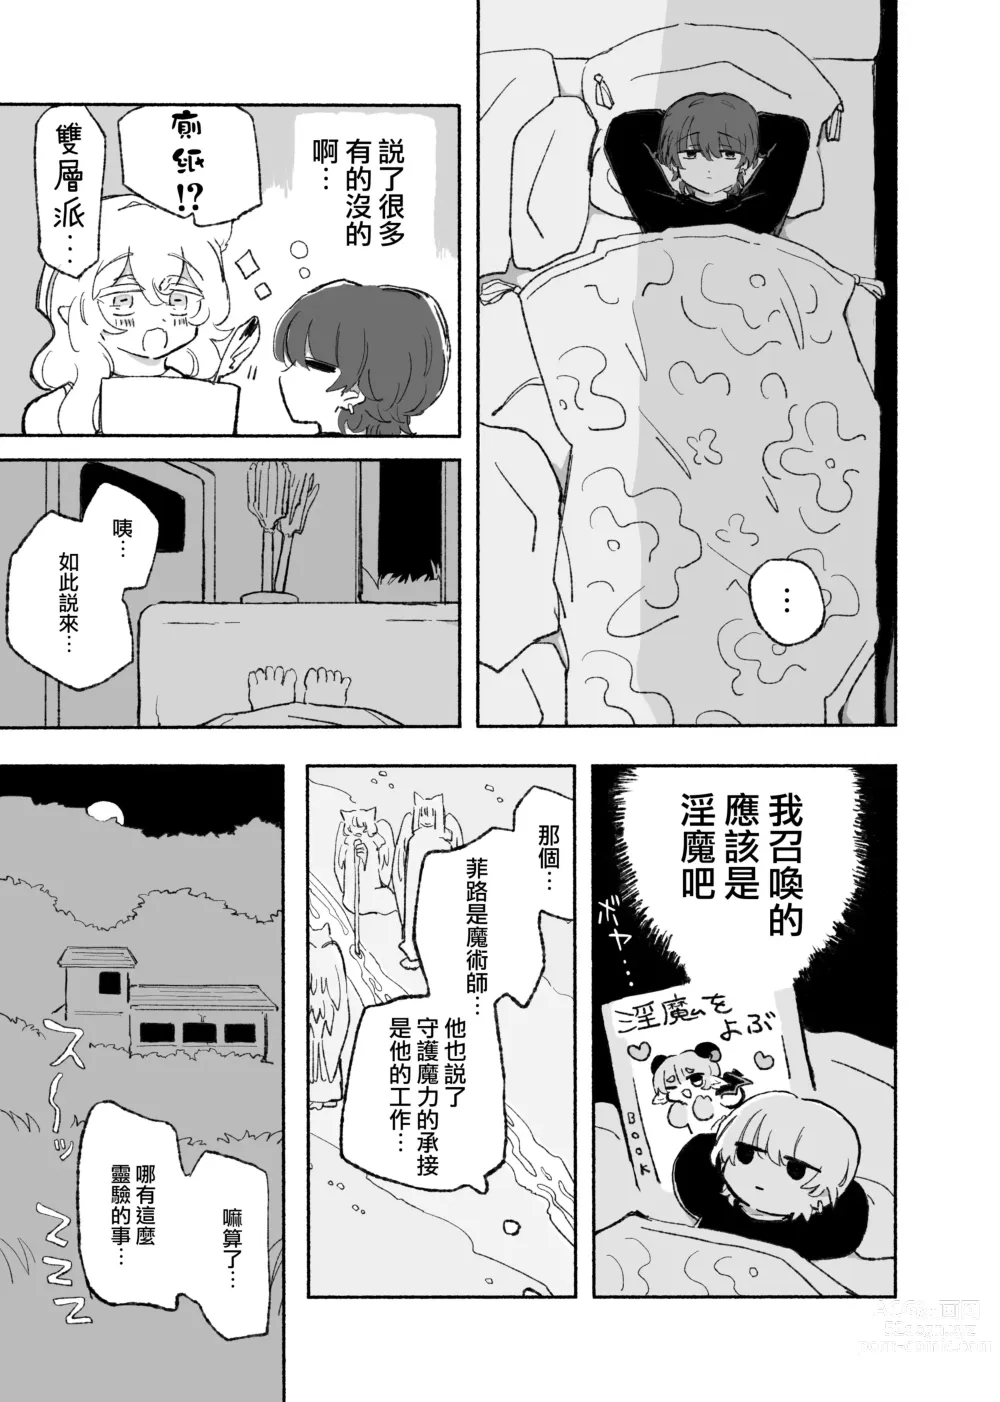 Page 13 of doujinshi 零之惡魔